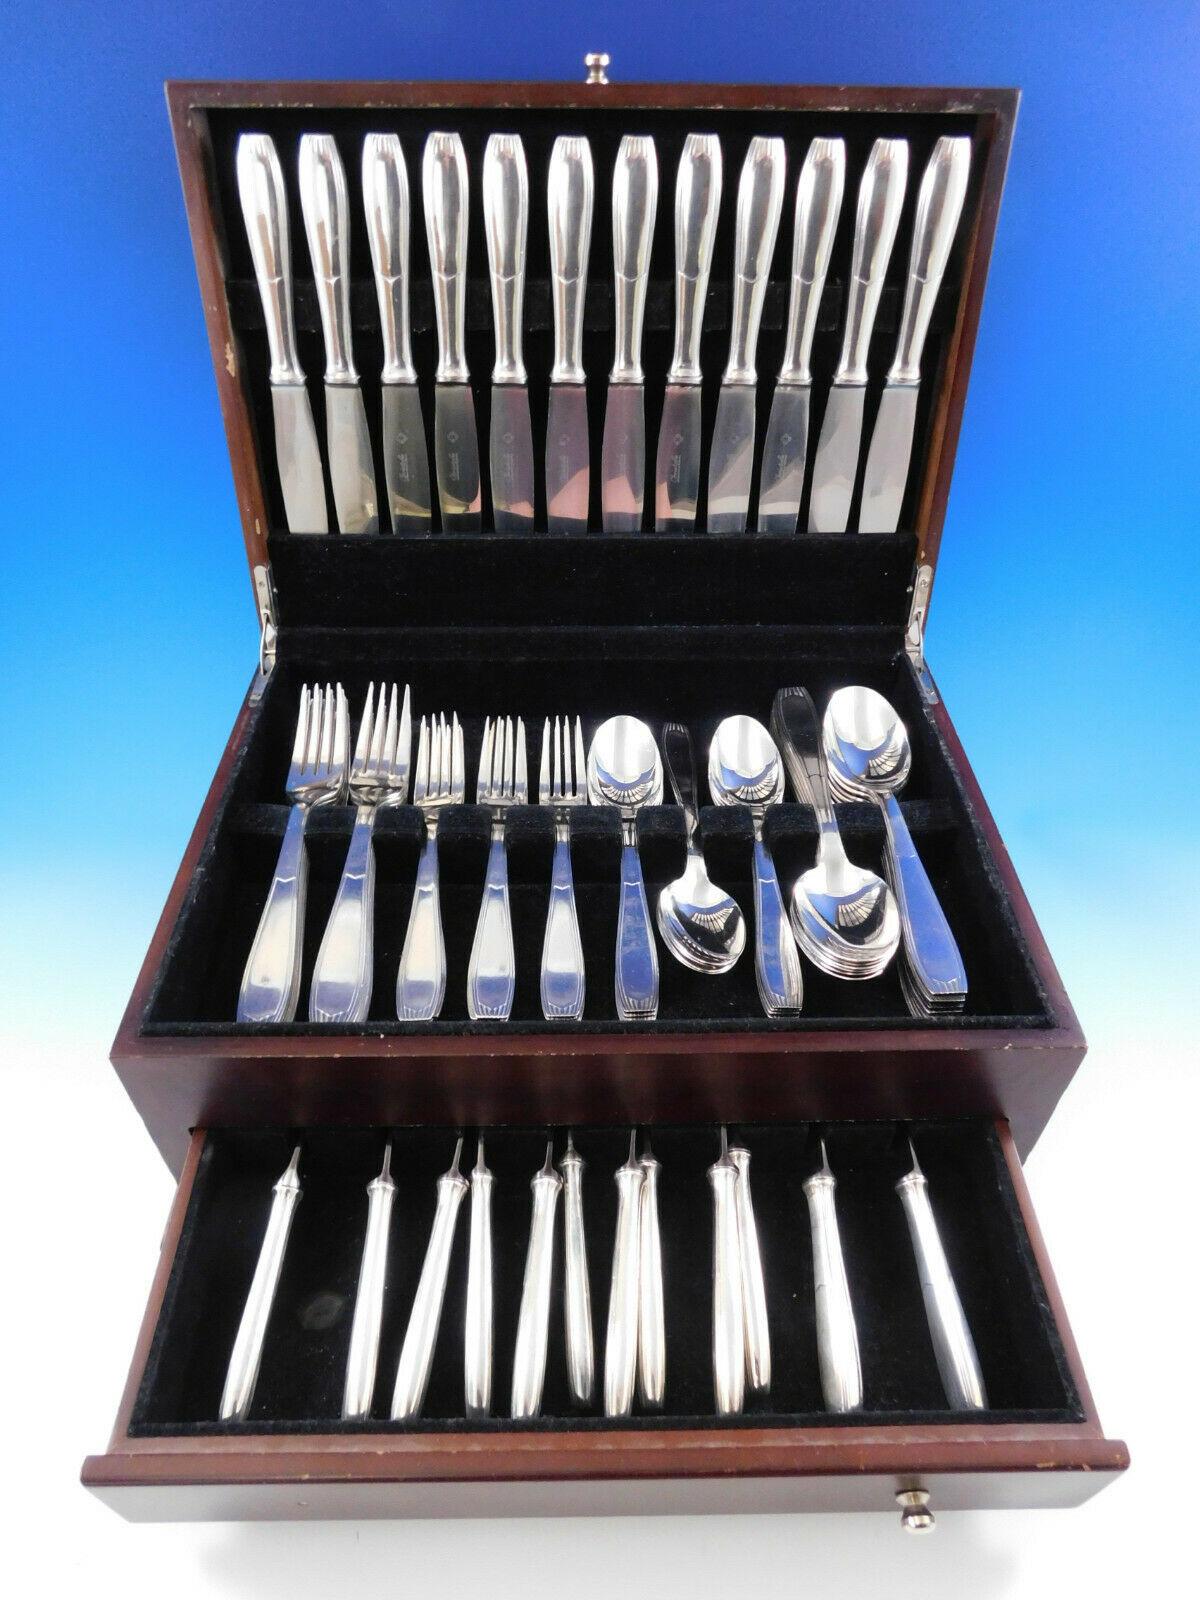 Rare Art Deco dinner size Saigon by Christofle France Silverplate flatware set, designed by Luc Lanel - 72 pieces. This set includes:

12 dinner size knives, 9 3/4